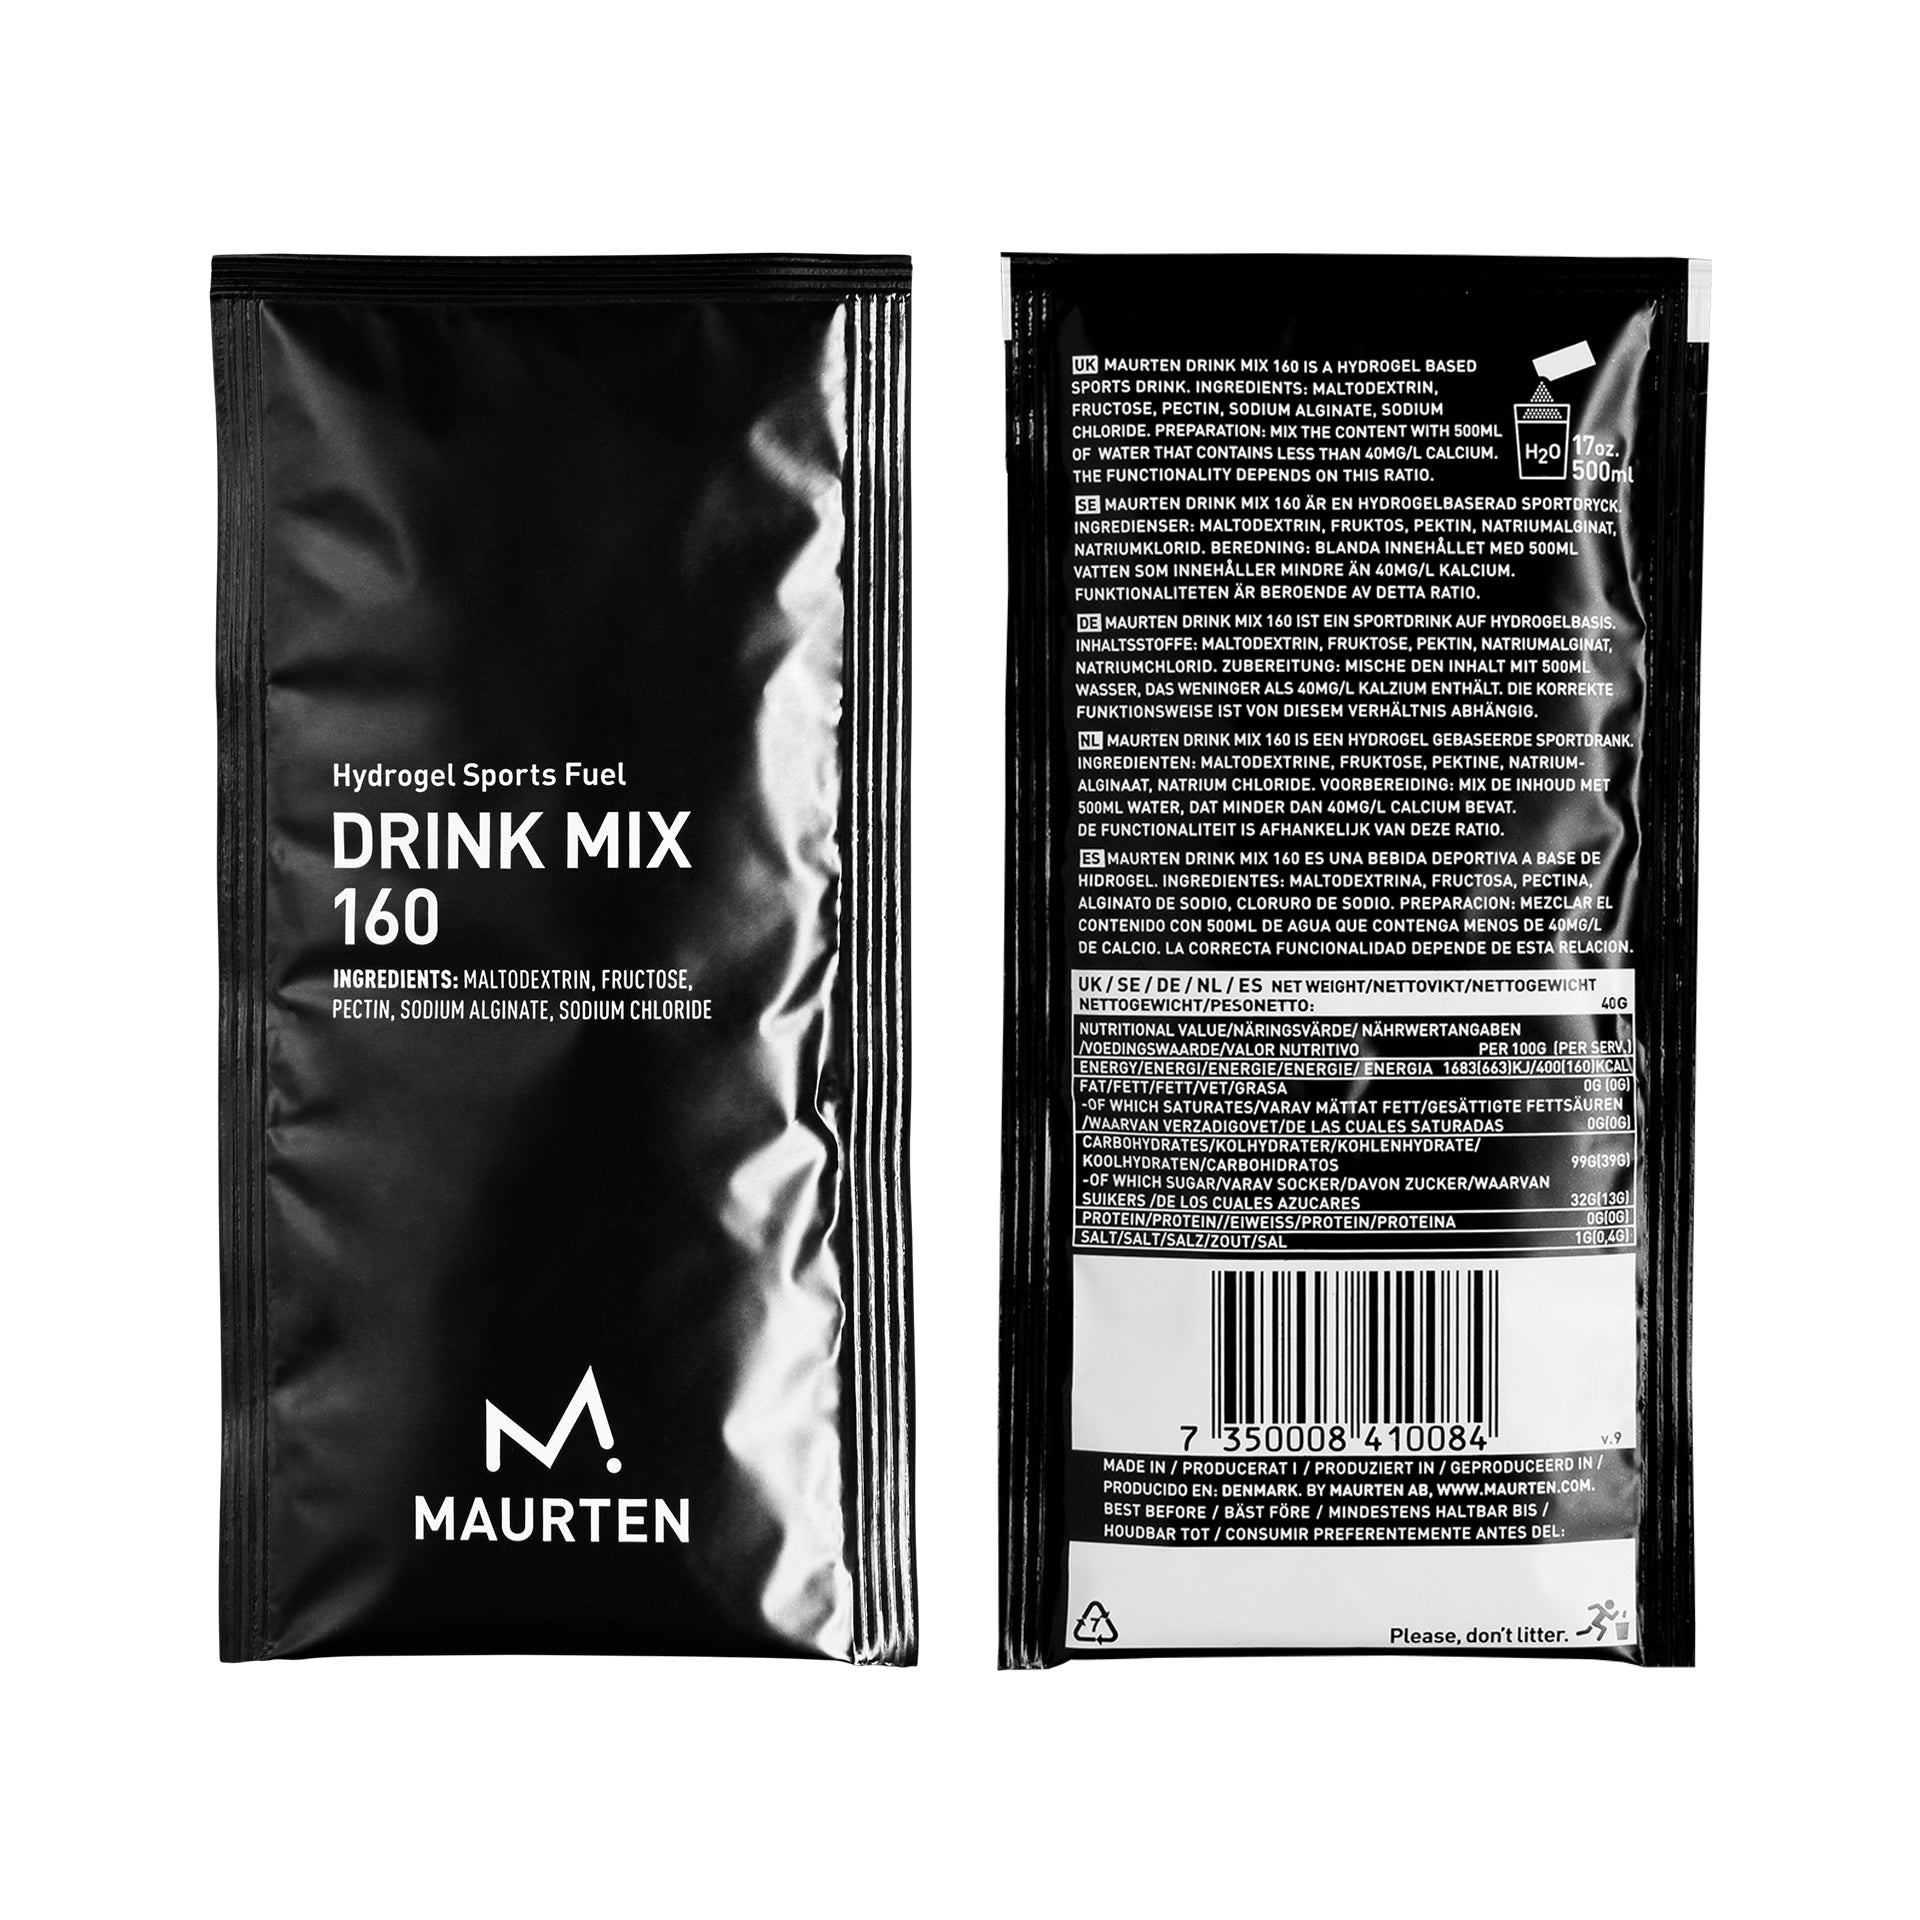 A Packet of Maurten Drink Mix 160 Hydrogen Sports Fuel for Cycling